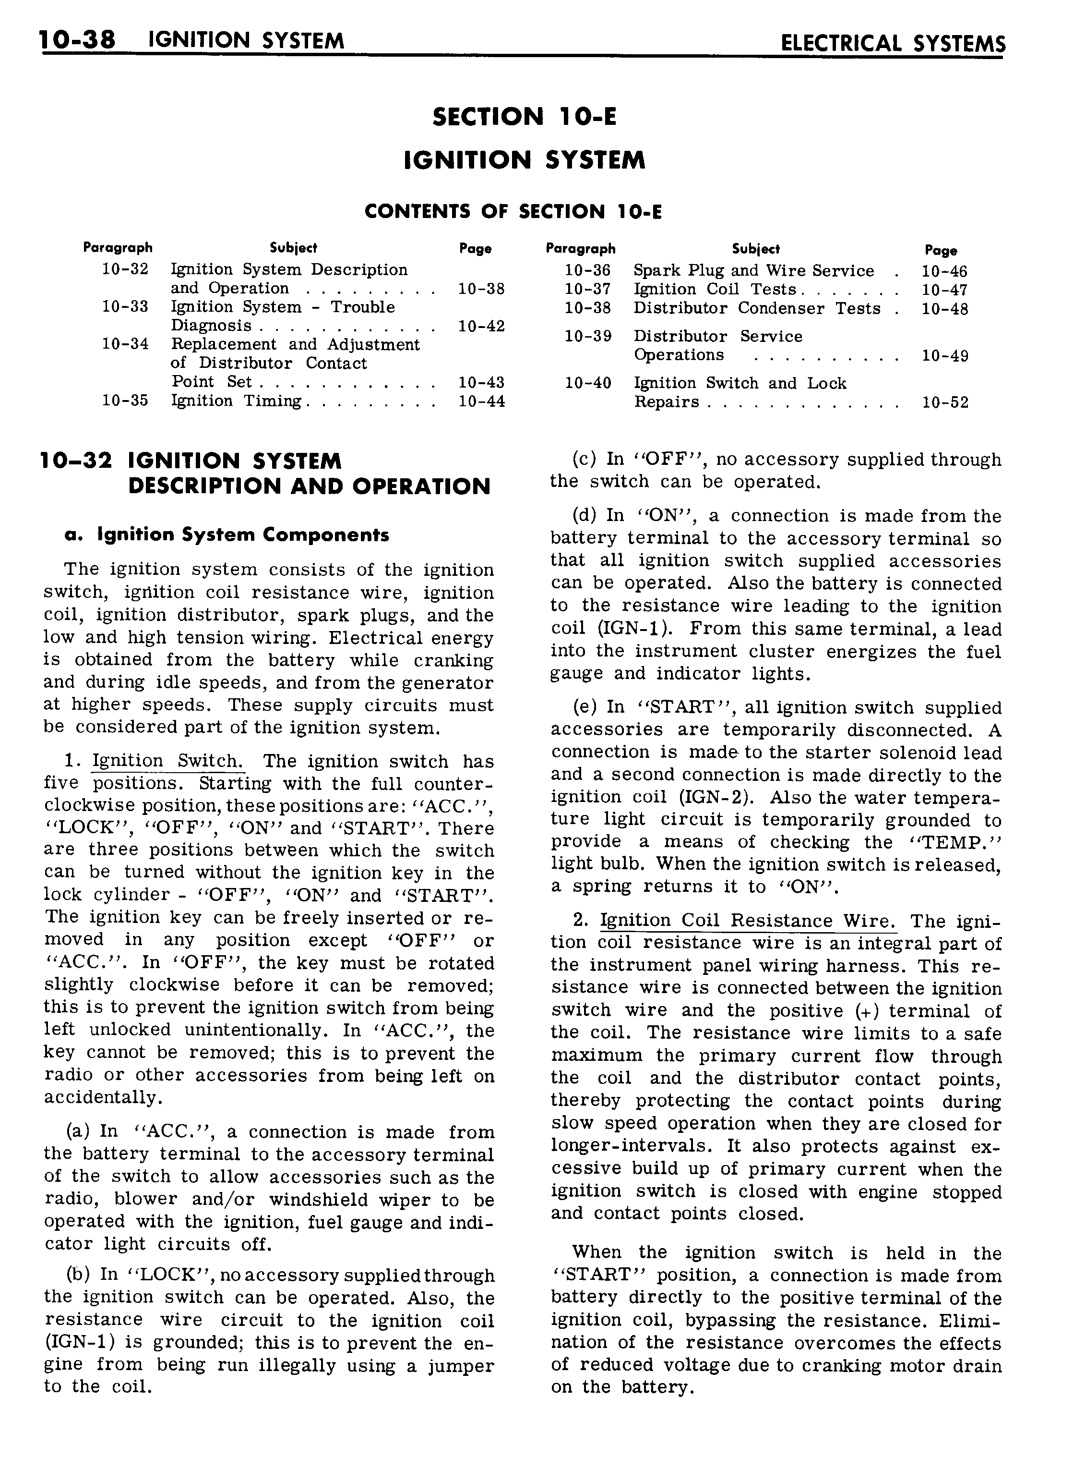 n_10 1961 Buick Shop Manual - Electrical Systems-038-038.jpg